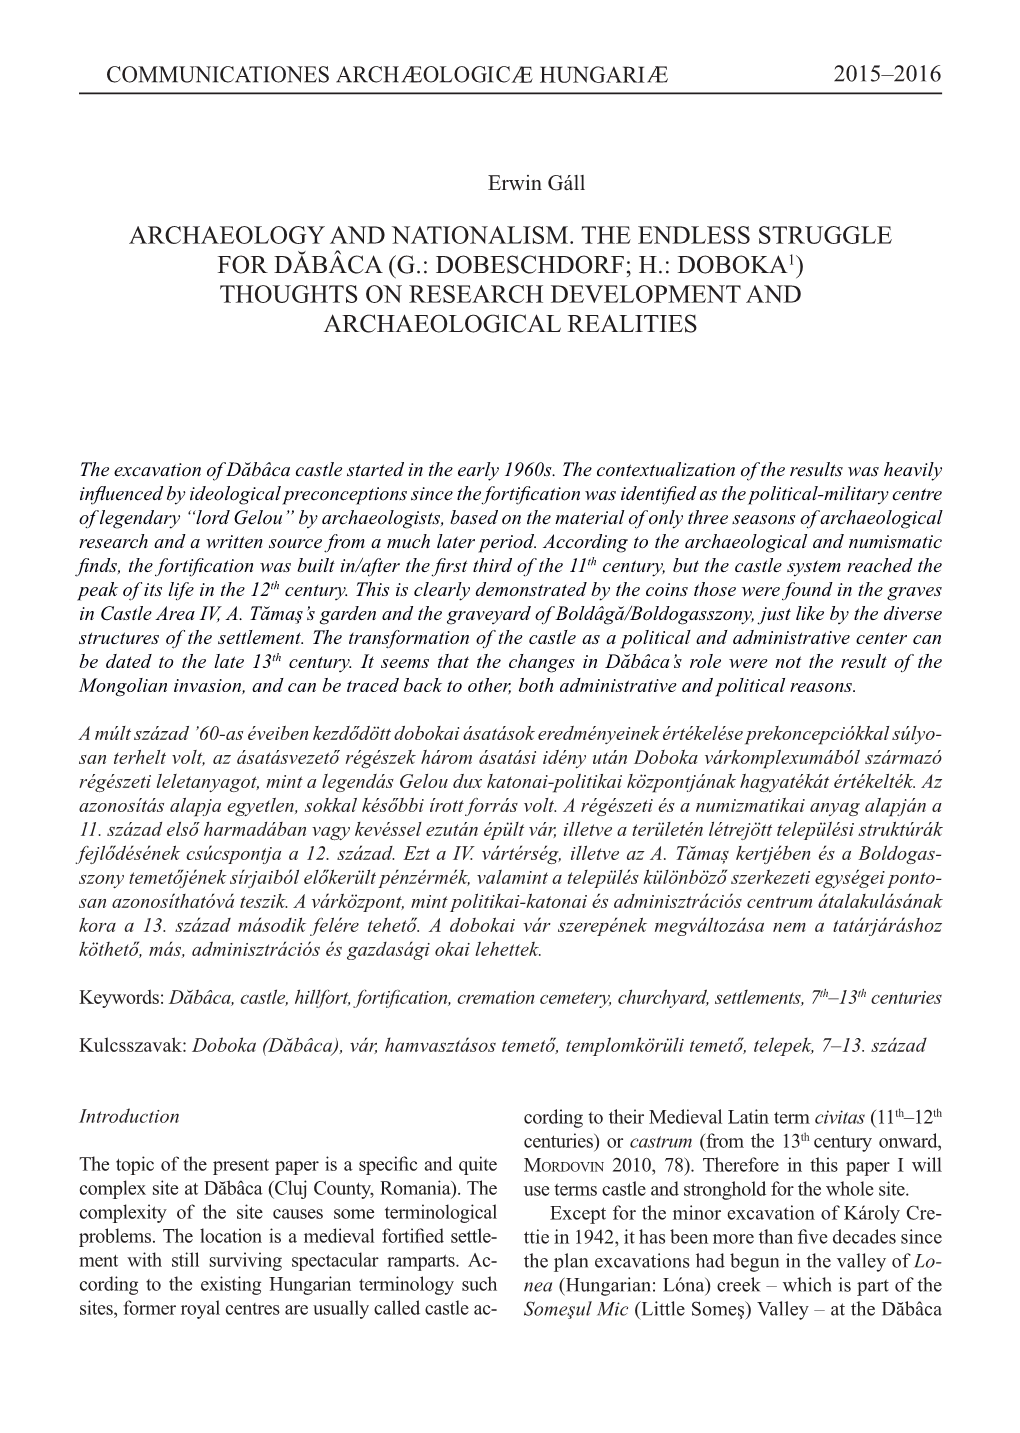 Archaeology and Nationalism. the Endless Struggle for D�Bâca (G.: Dobeschdorf; H.: Doboka1) Thoughts on Research Development and Archaeological Realities